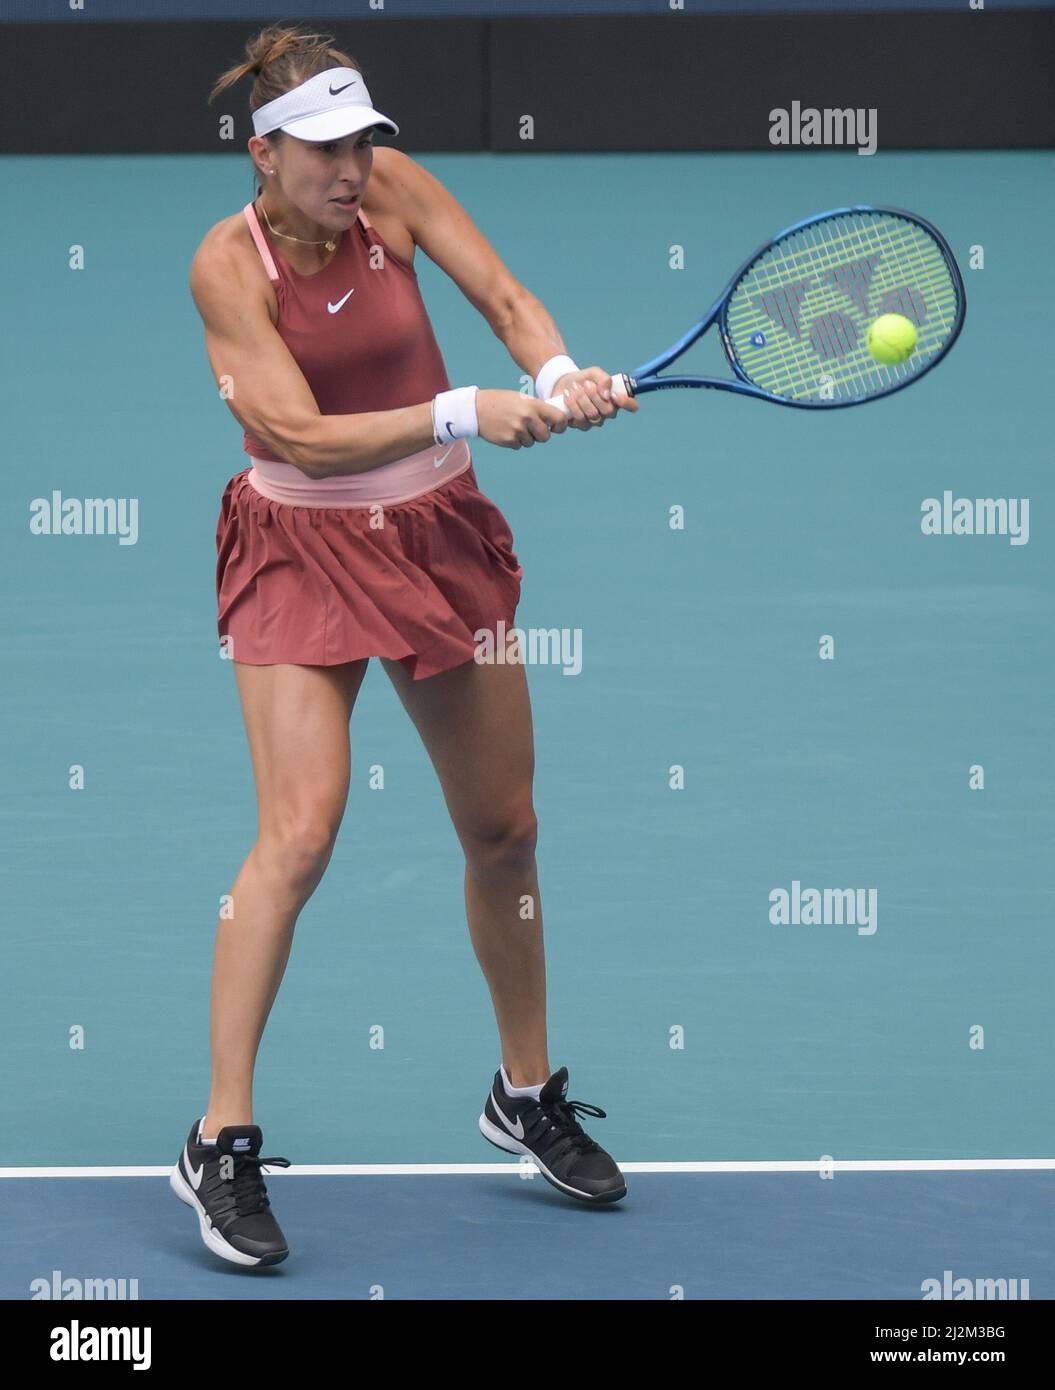 Belinda Bencic (SUI) is defeated by Naomi Osaka (JPN) 6-4, 3-6, 4-6, at the Miami  Open being played at Hard Rock Stadium in Miami Gardens, Florida on March  31, 2022: ©Karla Kinne/Tennisclix/CSM/Sipa